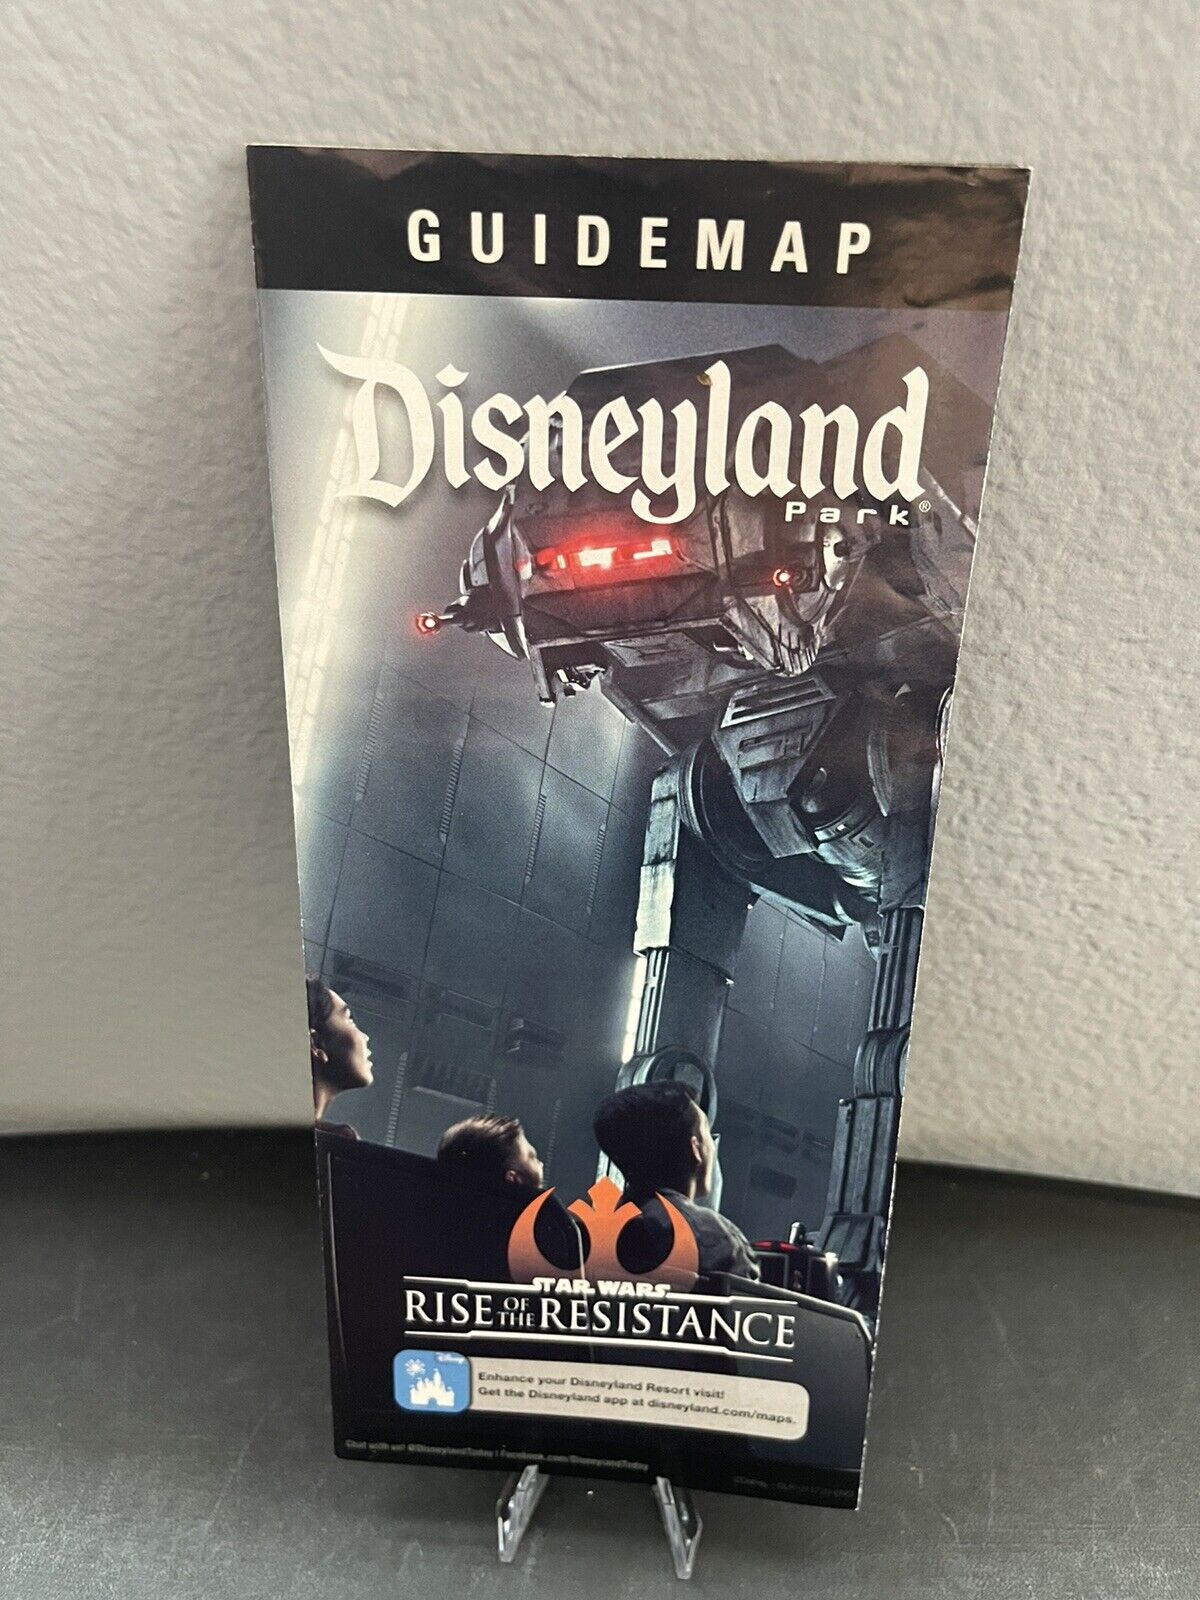 Disneyland Park Guide Map 2020 INCLUDING RISE OF THE RESISTANCE Vaulted New